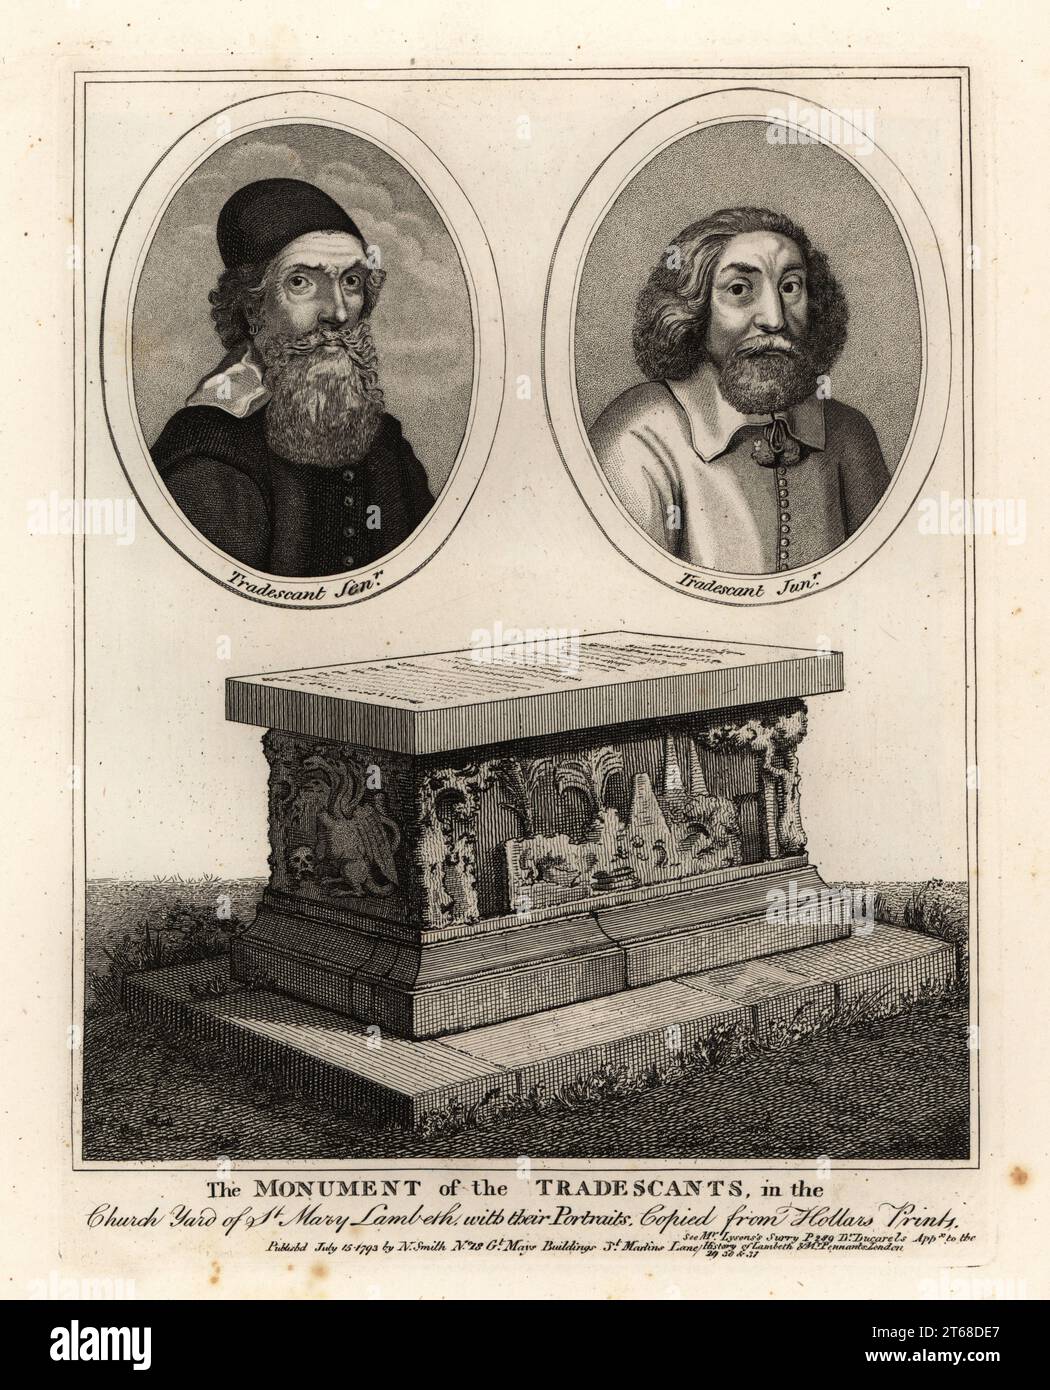 Oval portraits of naturalists and collectors John Tradescant the Elder and Younger, and their grave monument in the churchyard of St. Mary Lambeth. Copperplate engraving by John Thomas Smith after original drawings by members of the Society of Antiquaries from his J.T. Smiths Antiquities of London and its Environs, J. Sewell, R. Folder, J. Simco, London, 1793. Stock Photo